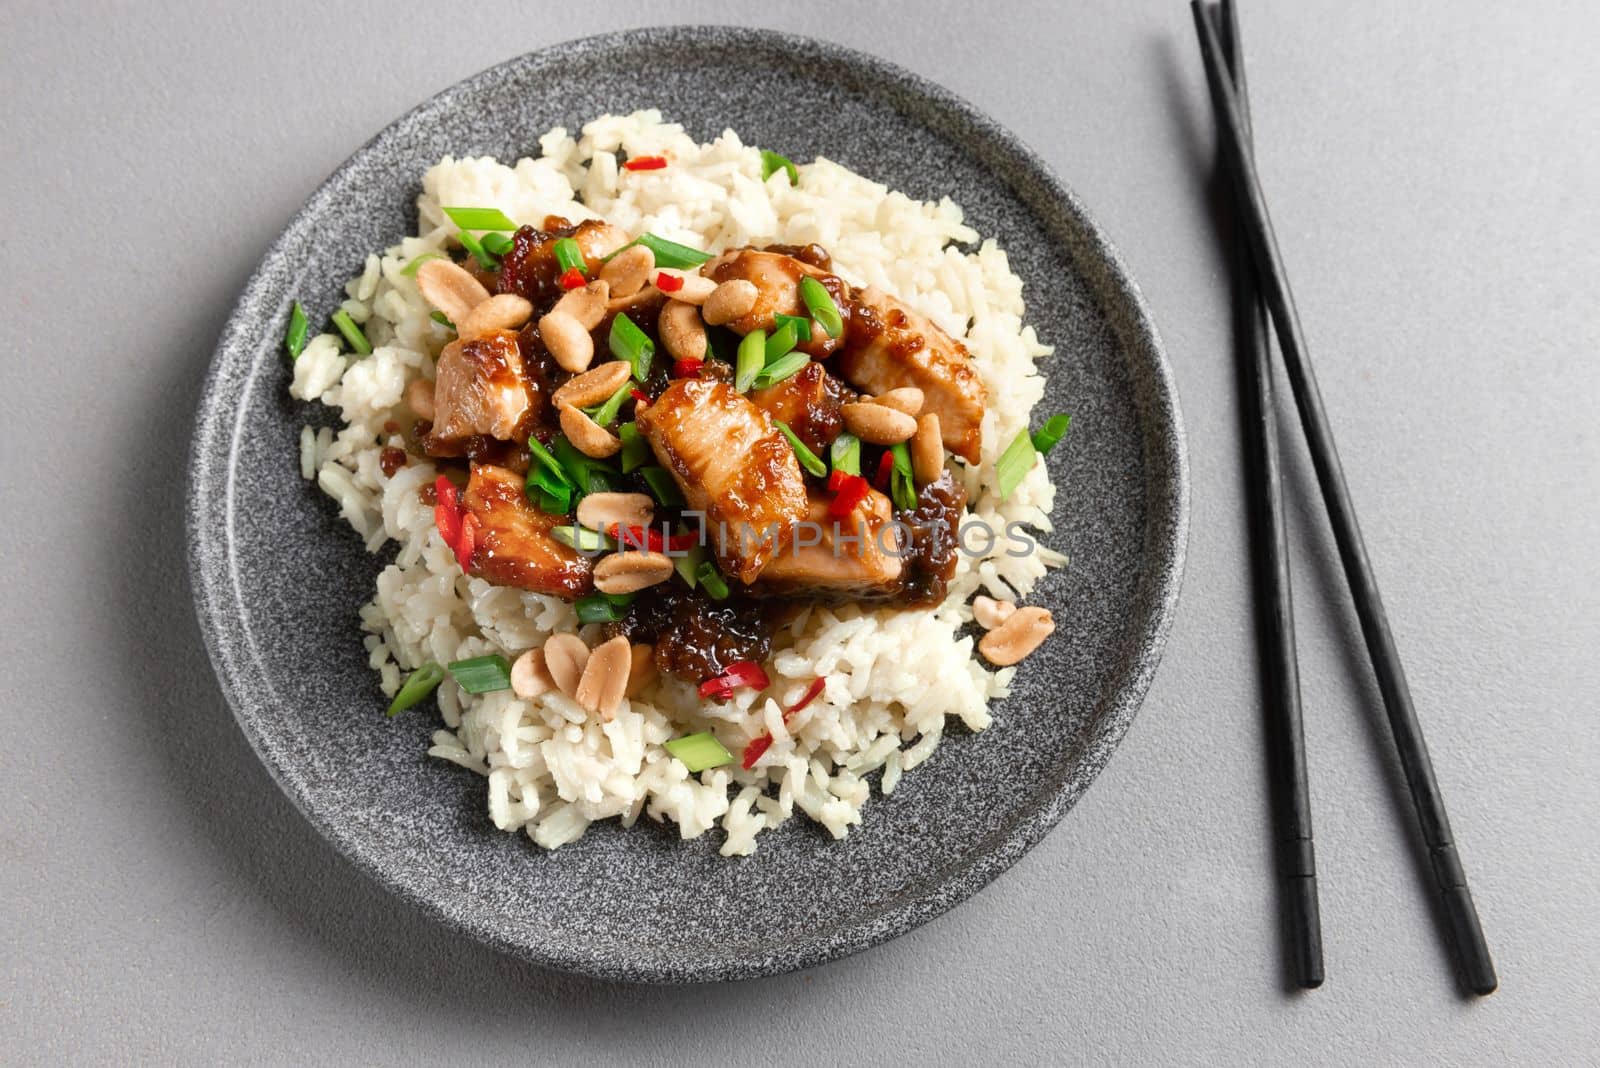 Asian Cuisine. Chicken Kung Pao dish with rice. Asian food on a gray background. Top view.